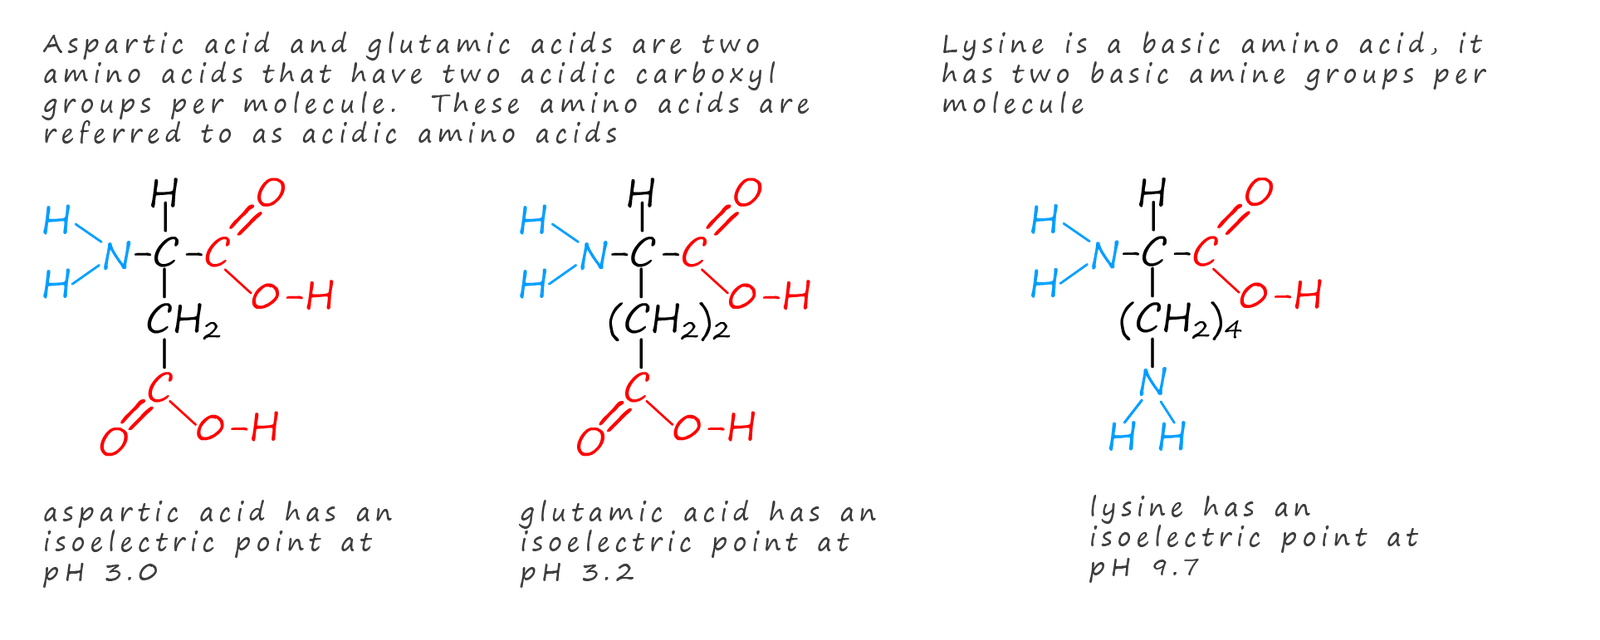 isoelectric points of acidic and basic amino acids